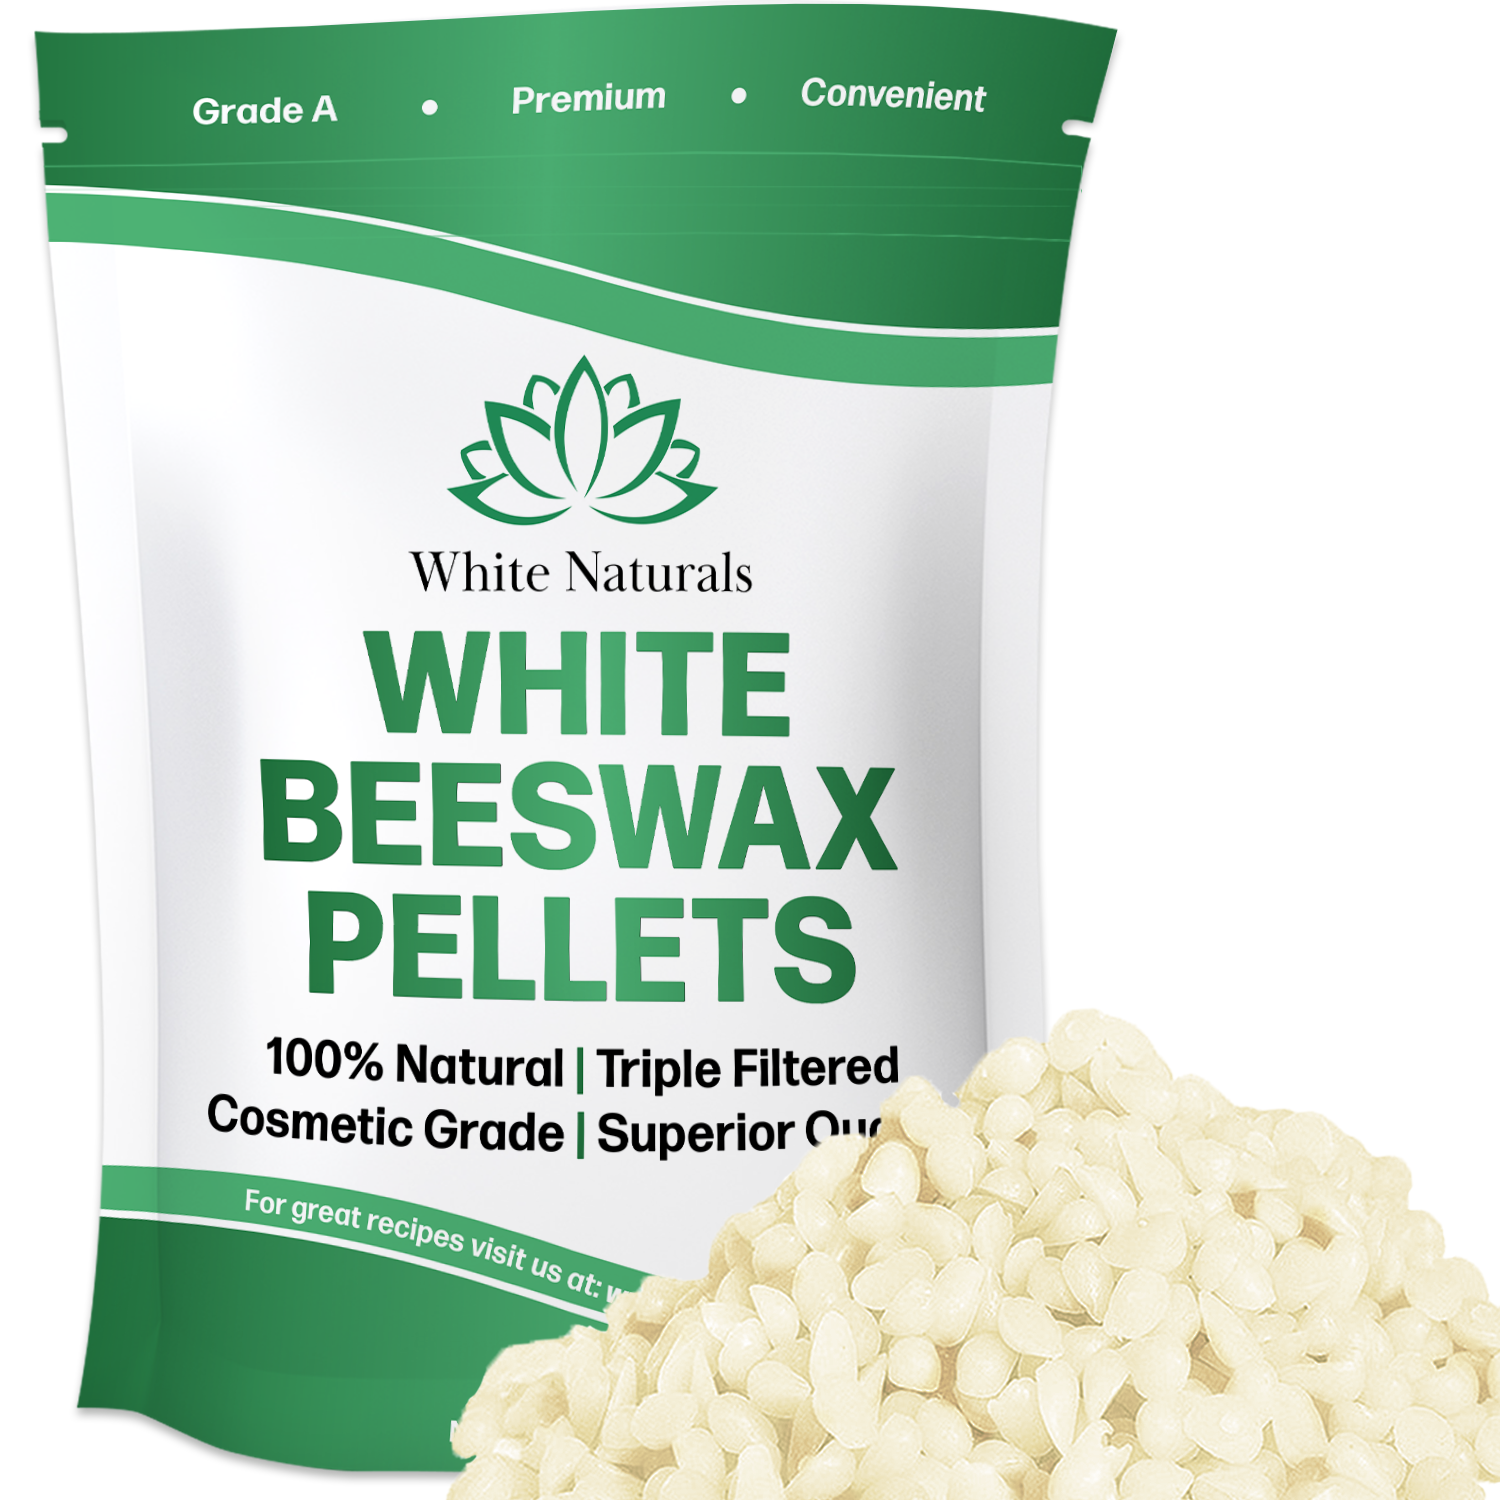 Wholesale bulk organic beeswax For Rejuvenating Your Body Health